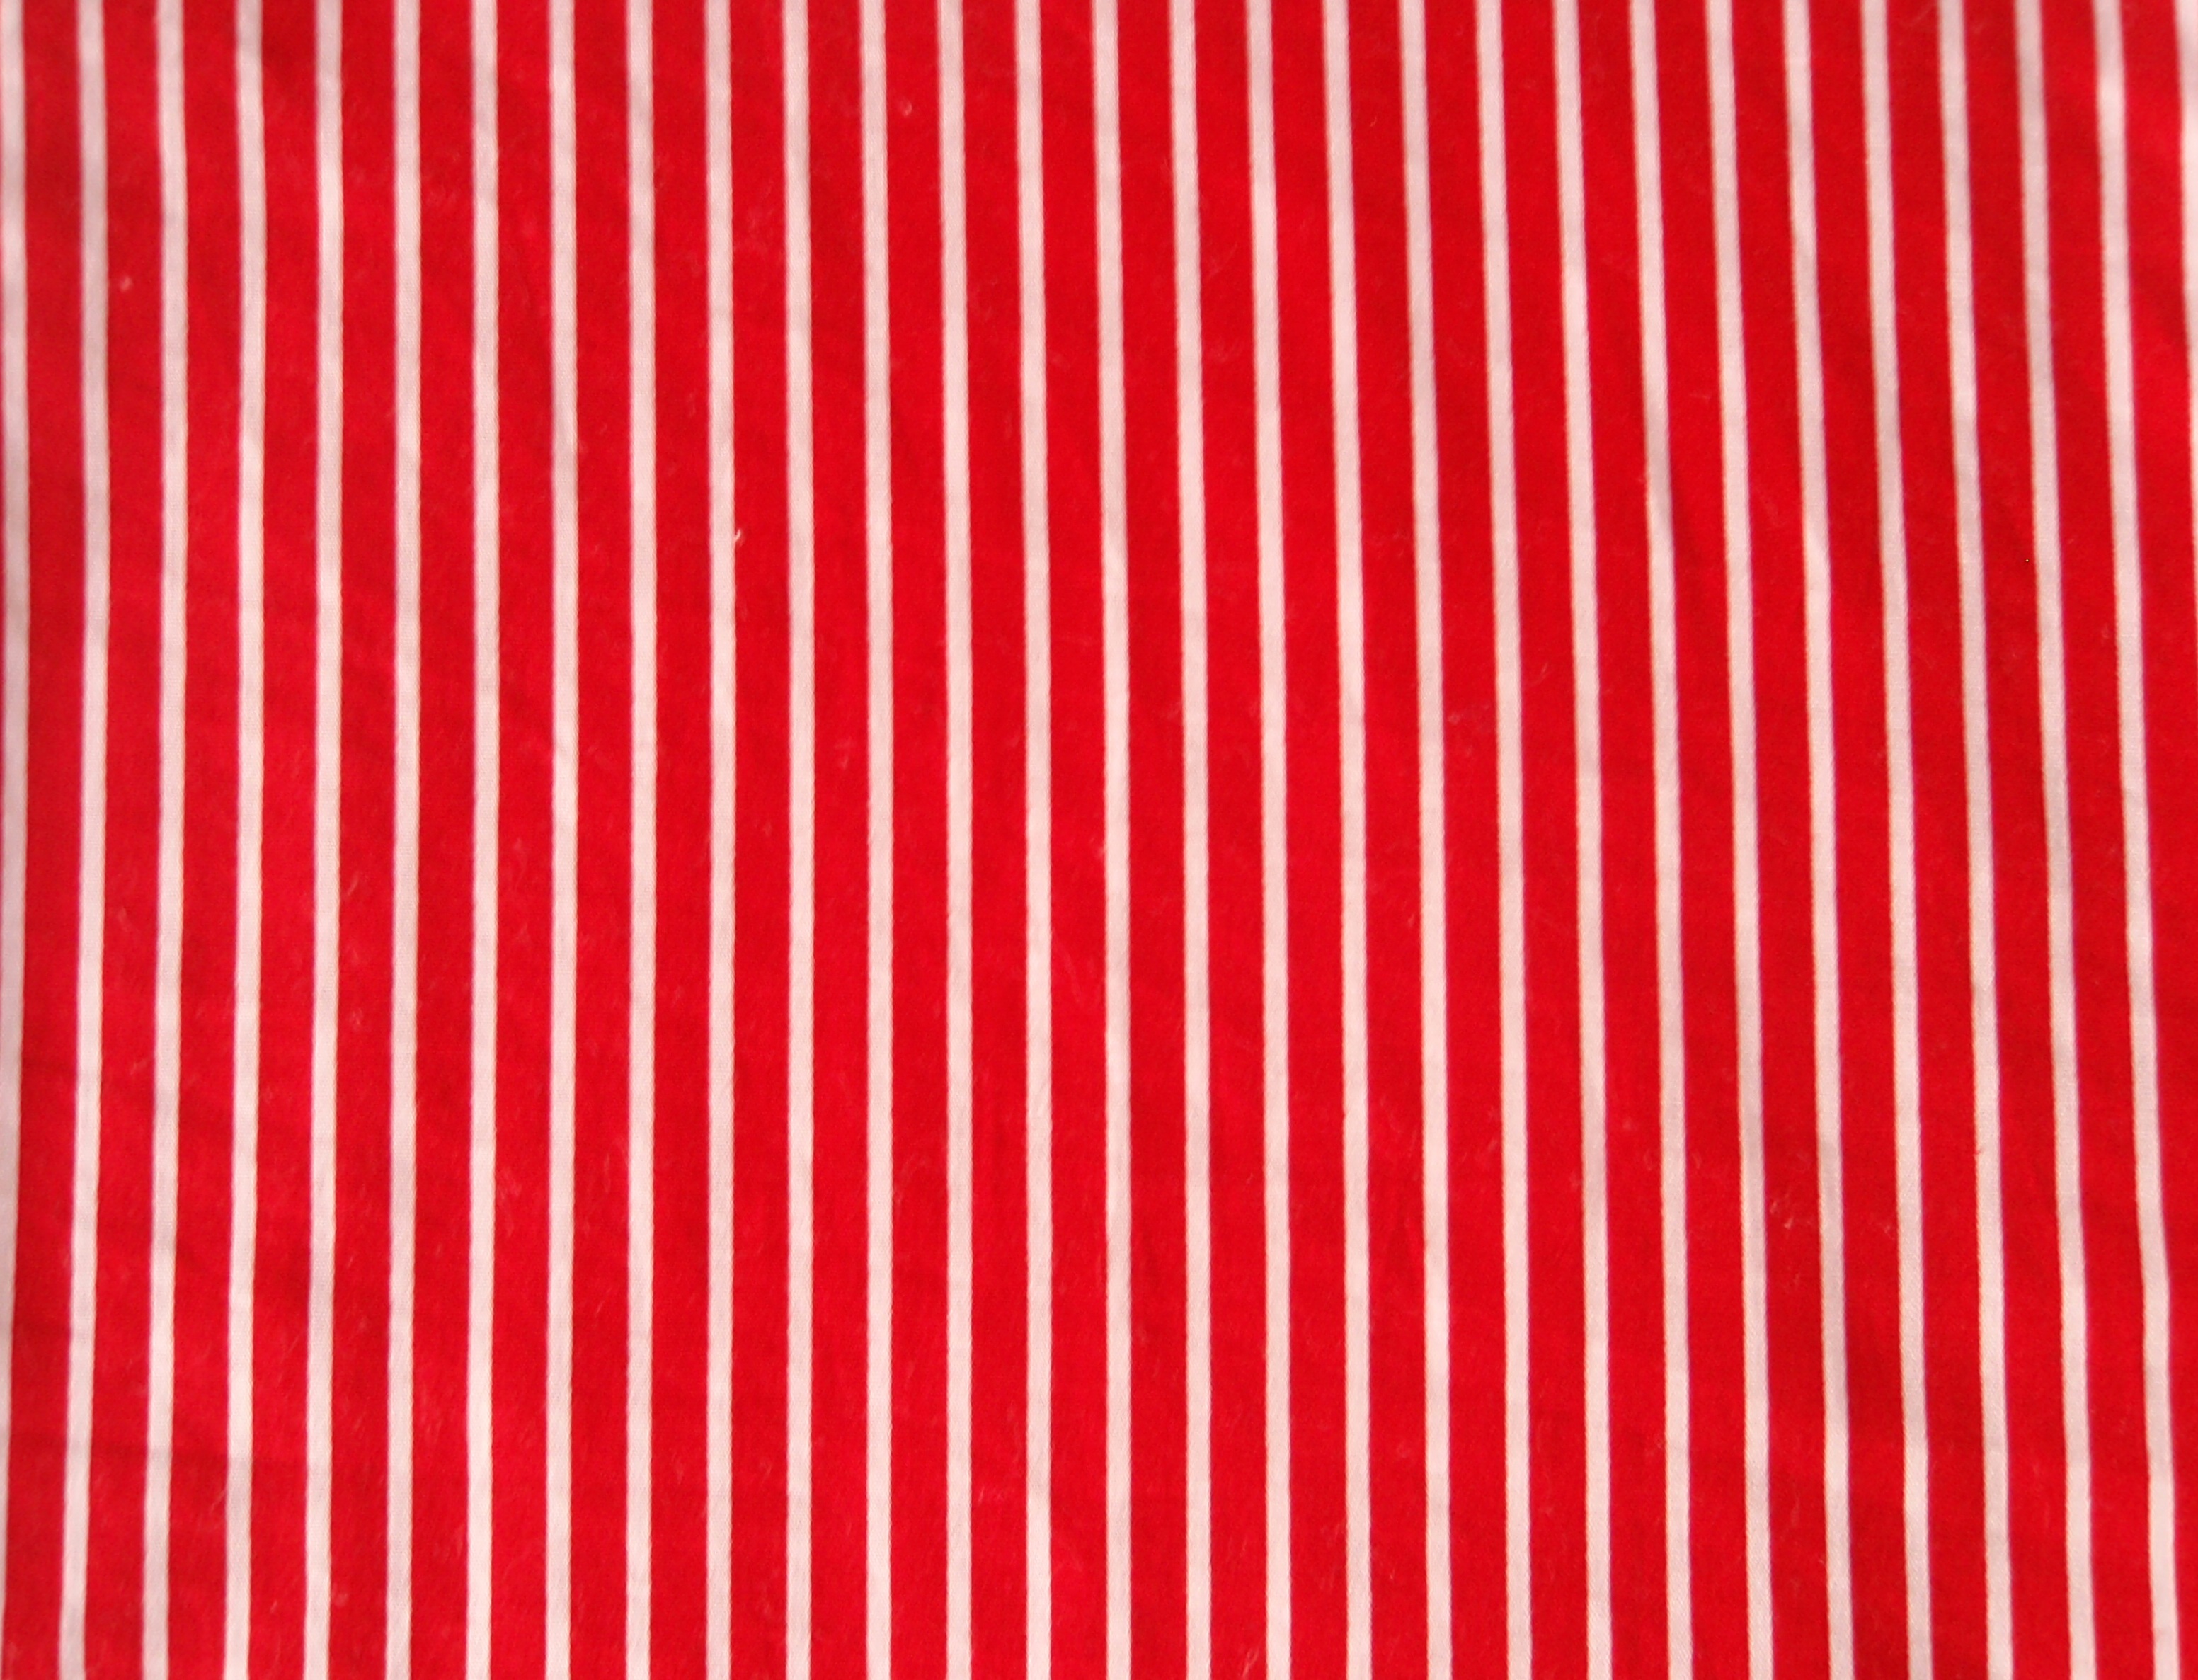 Free Newest Red Striped Wallpaper - Wrapping Paper - HD Wallpaper 